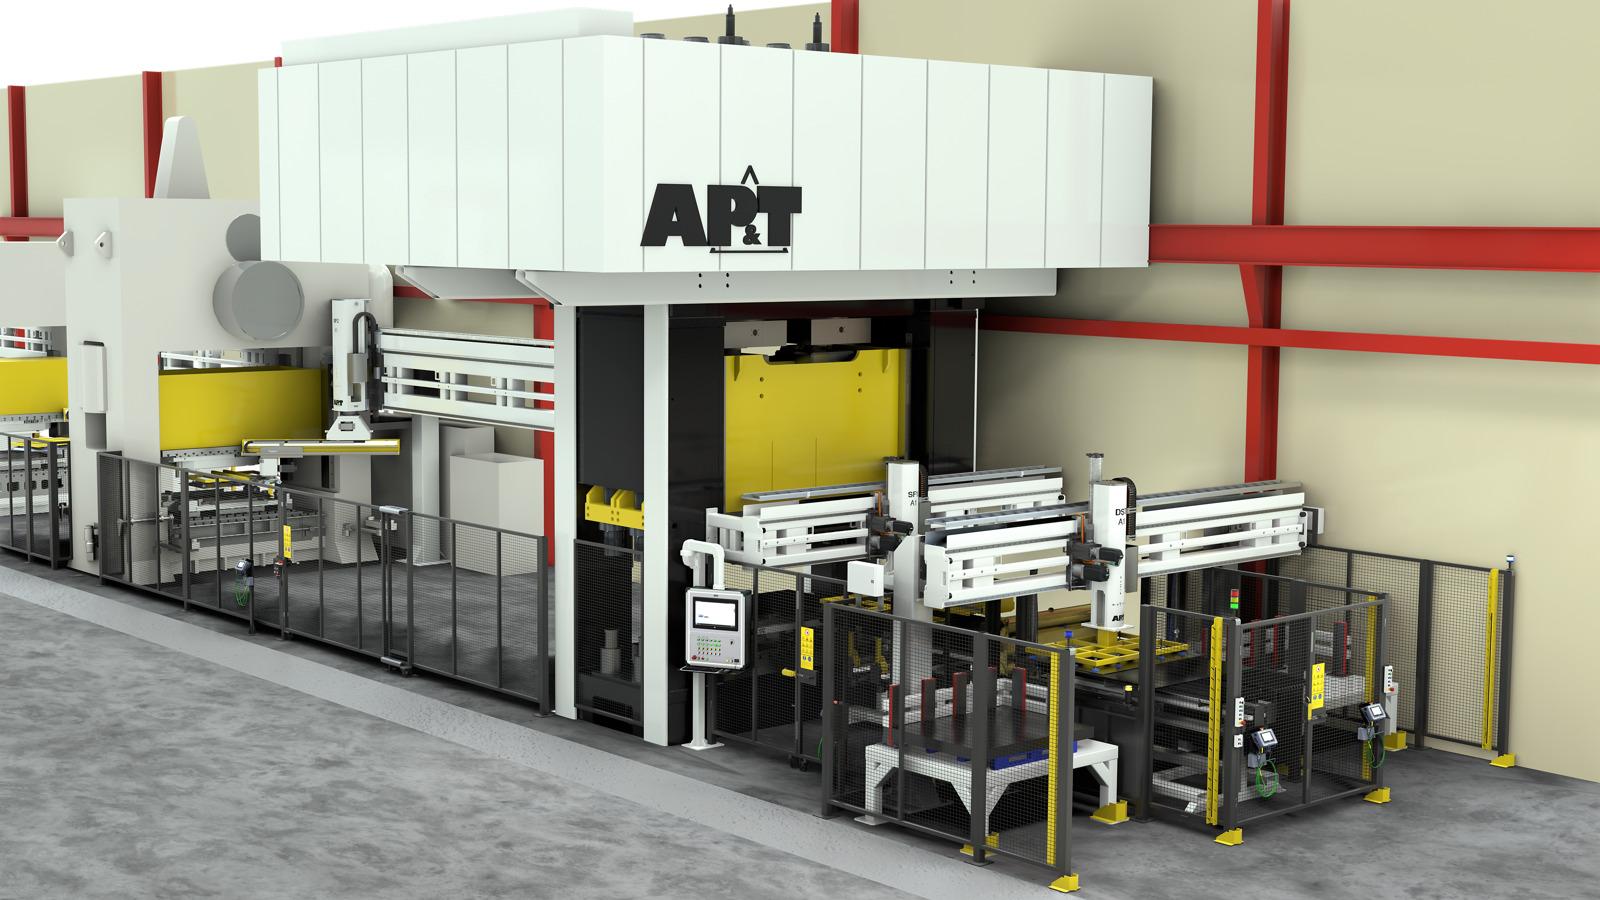 Bobcat’s new production line in Gwinner, North Dakota, USA includes AP&T's energy-efficient servohydraulic press and automation equipment. The order also includes line integration, operator training and support. 